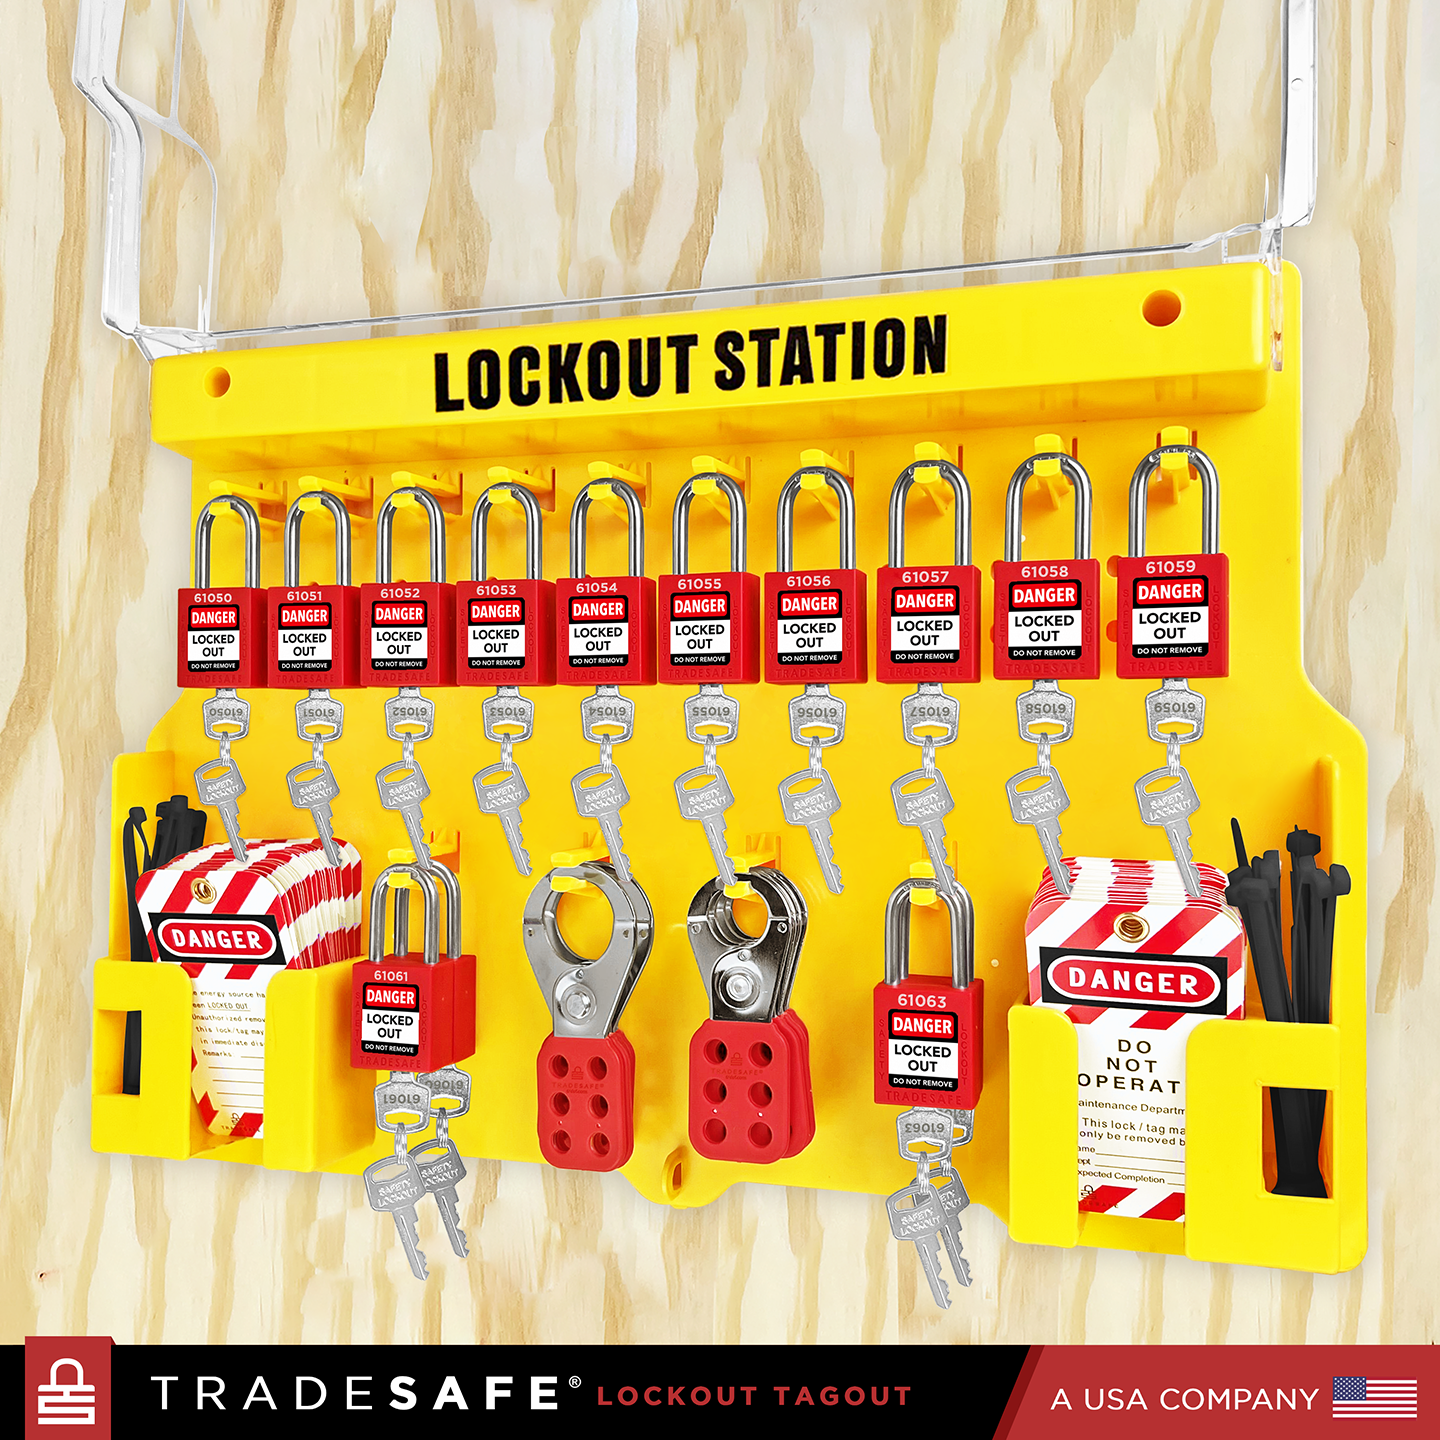 wall-mounted lockout tagout station stocked with loto devices